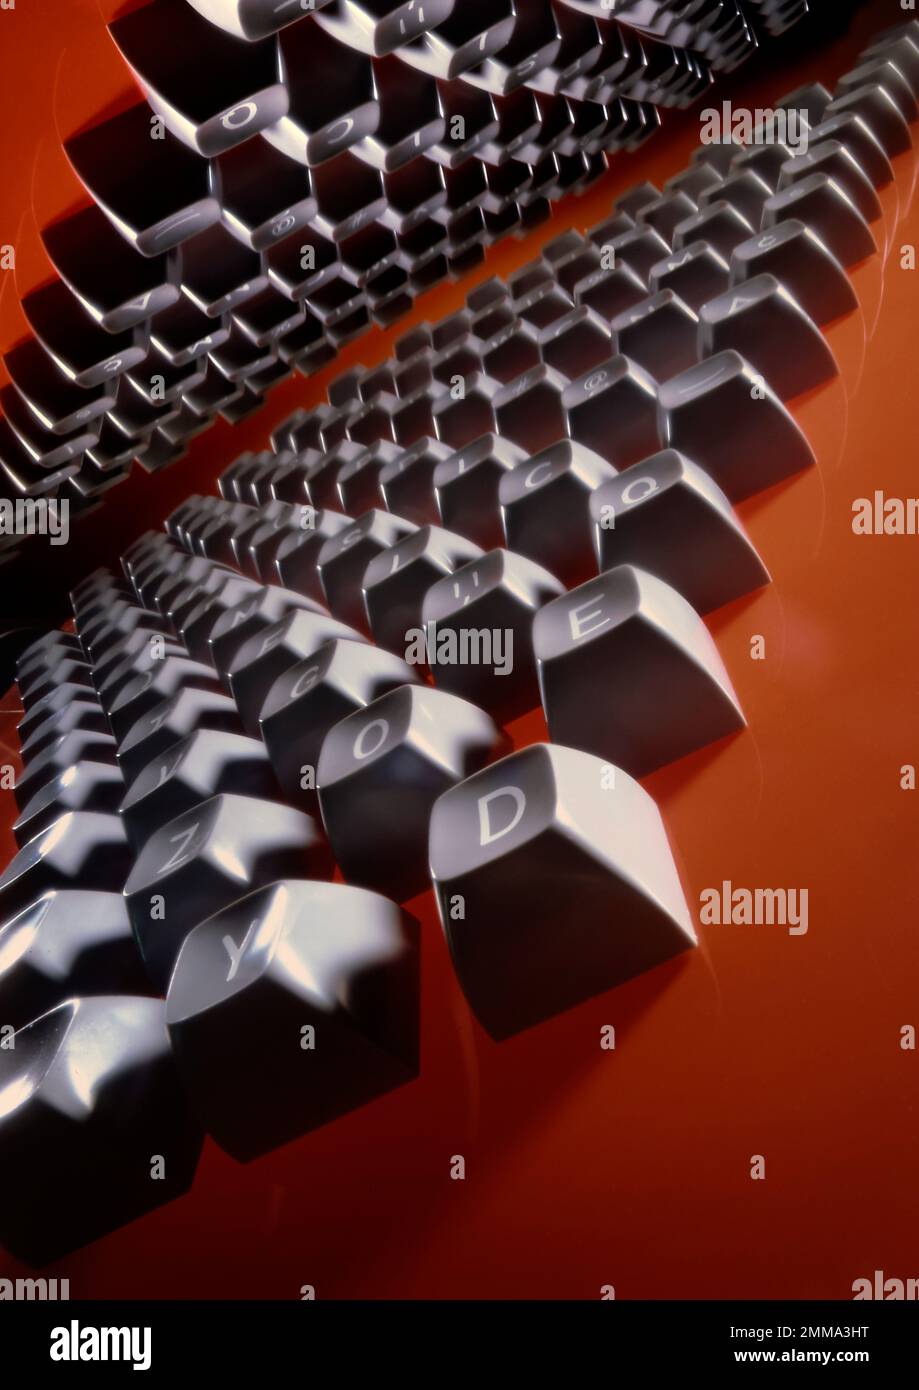 Computer keys in graphic, dramatic image, with vanishing point to the horizon.  Orange background in this studio photograph. Stock Photo